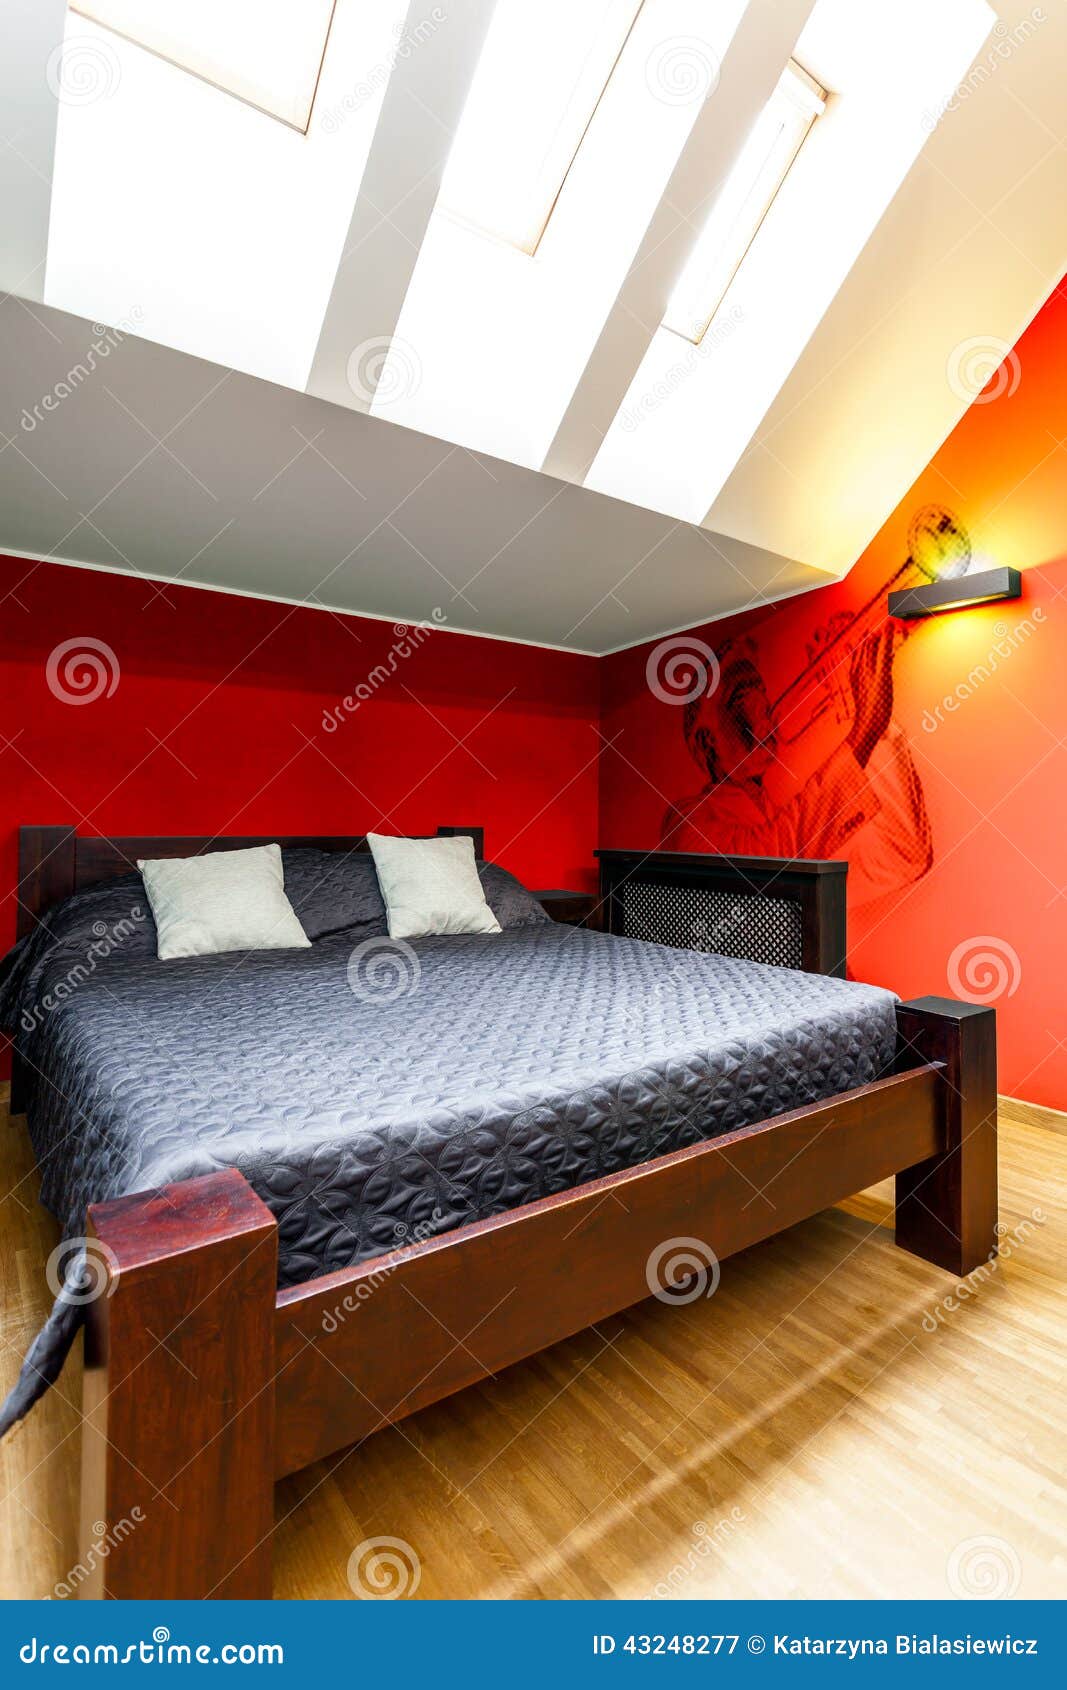 Double Bed In Modern Bedroom Stock Image - Image of ...